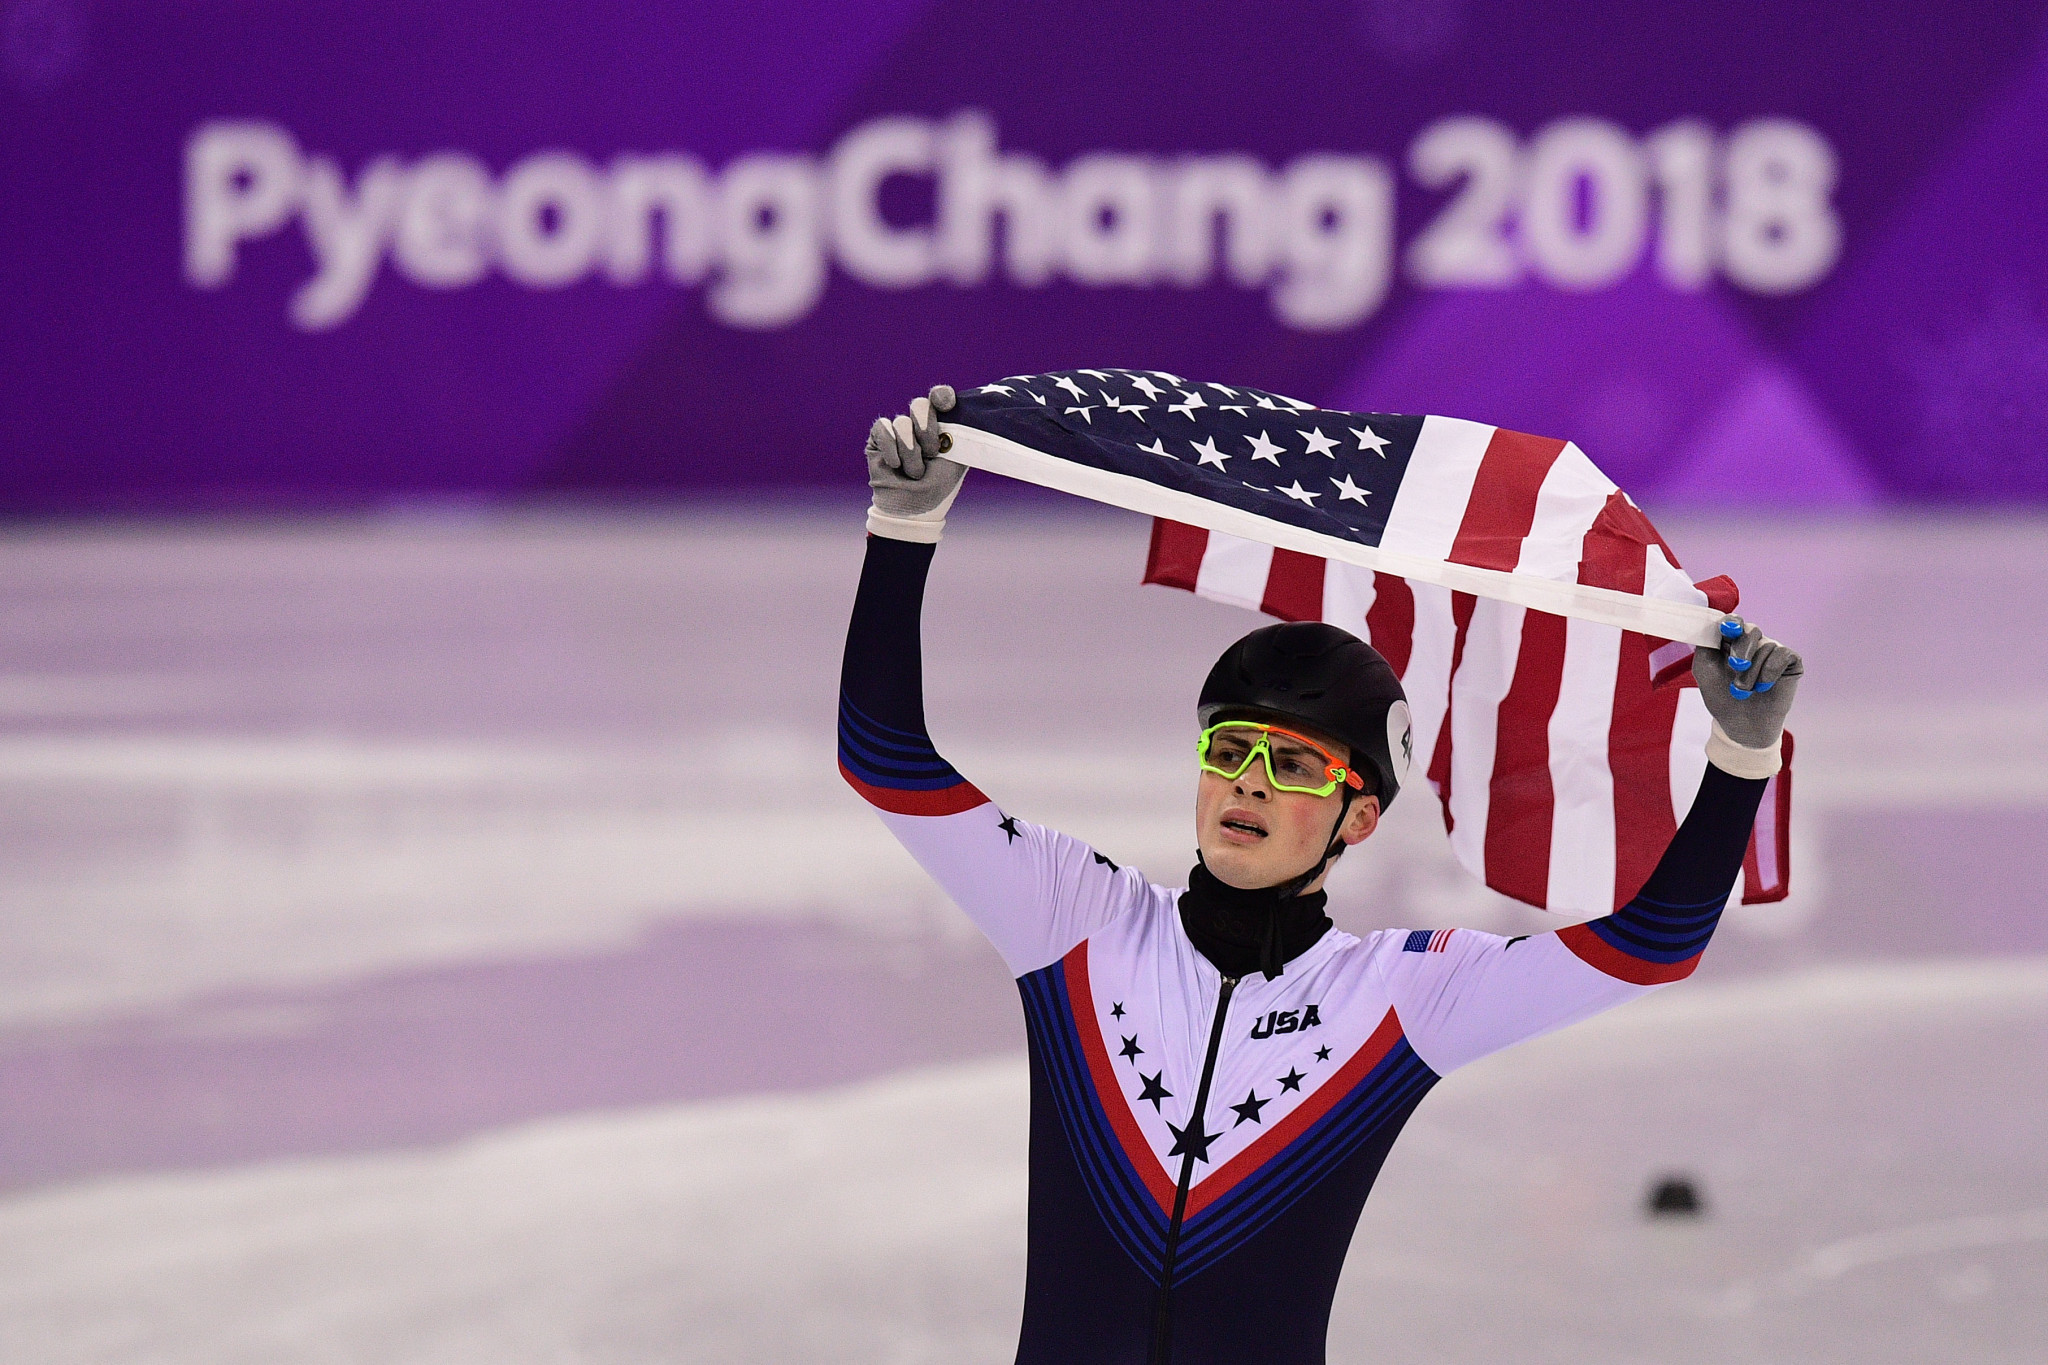 John-Henry Krueger claimed the United States only short track speed skating medal at Pyeongchang 2018 ©Getty Images